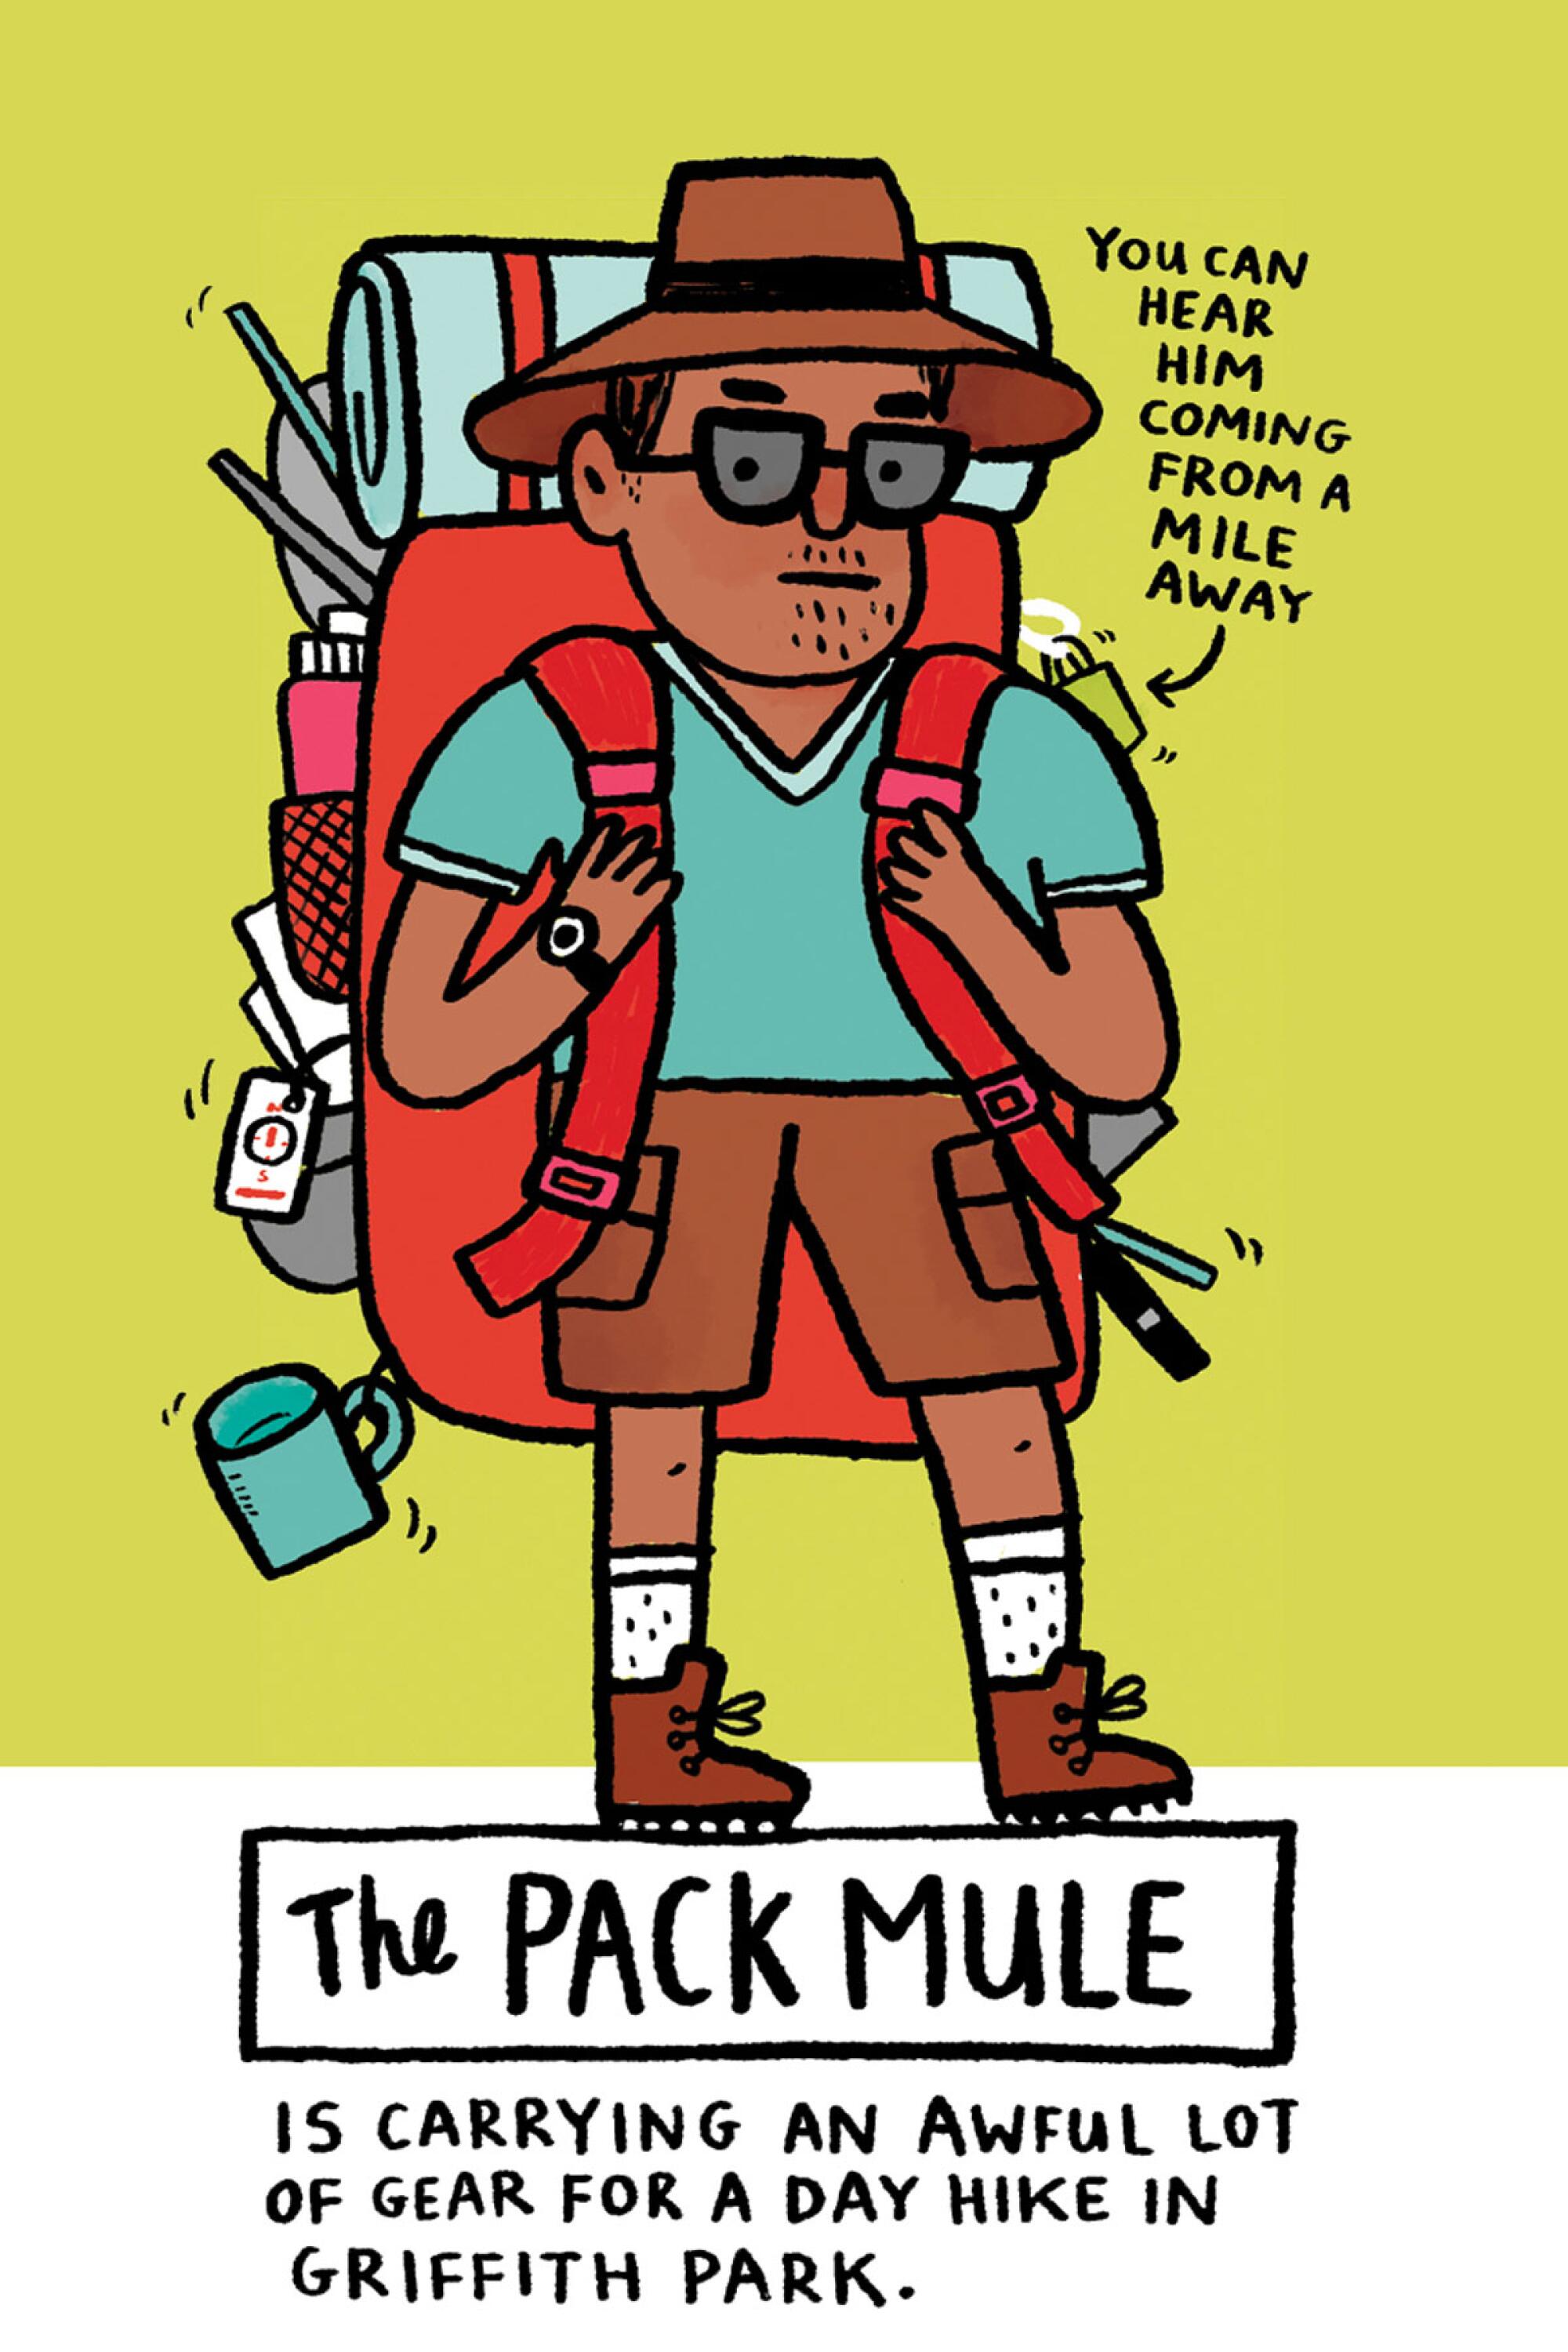 Comic of a person who carries a lot of gear hiking